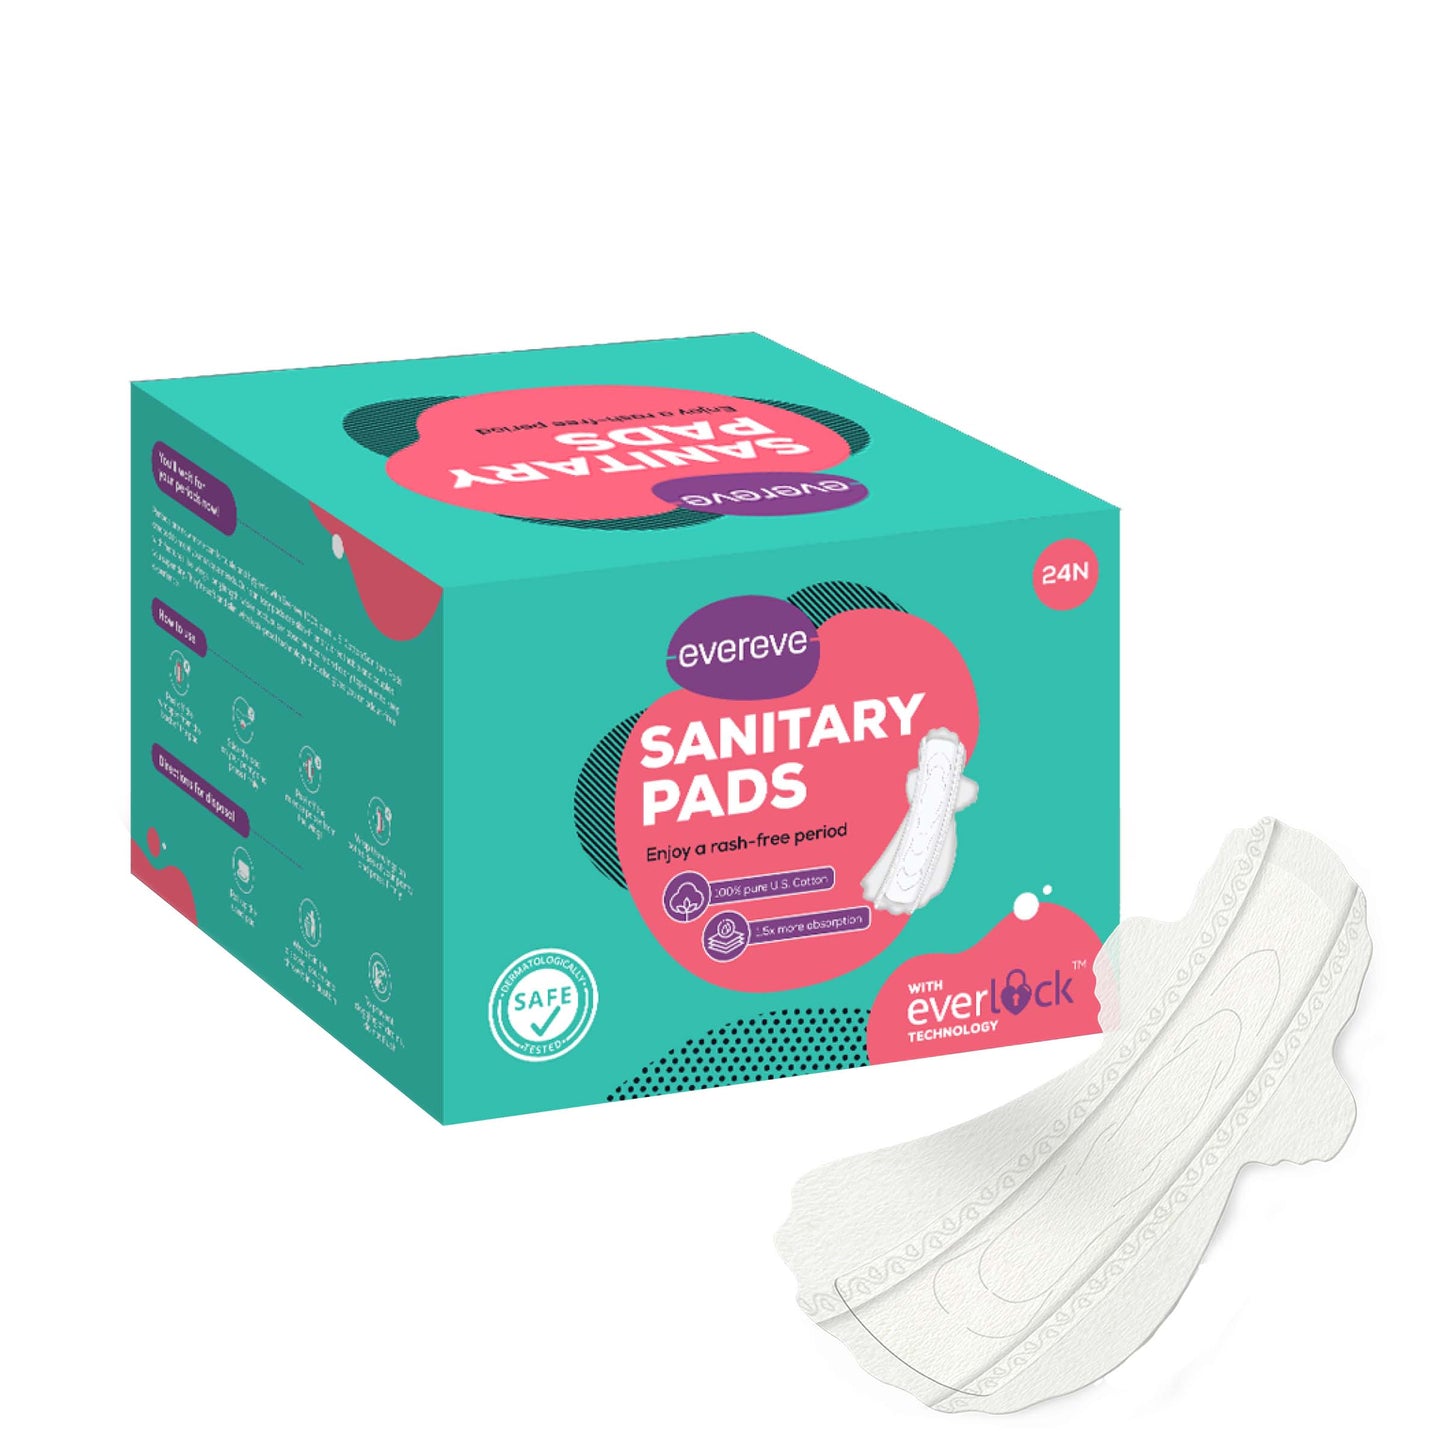 Evereve 100% pure U.S. Cotton Ultra Thin Sanitary Pads, XL, 24's Pack